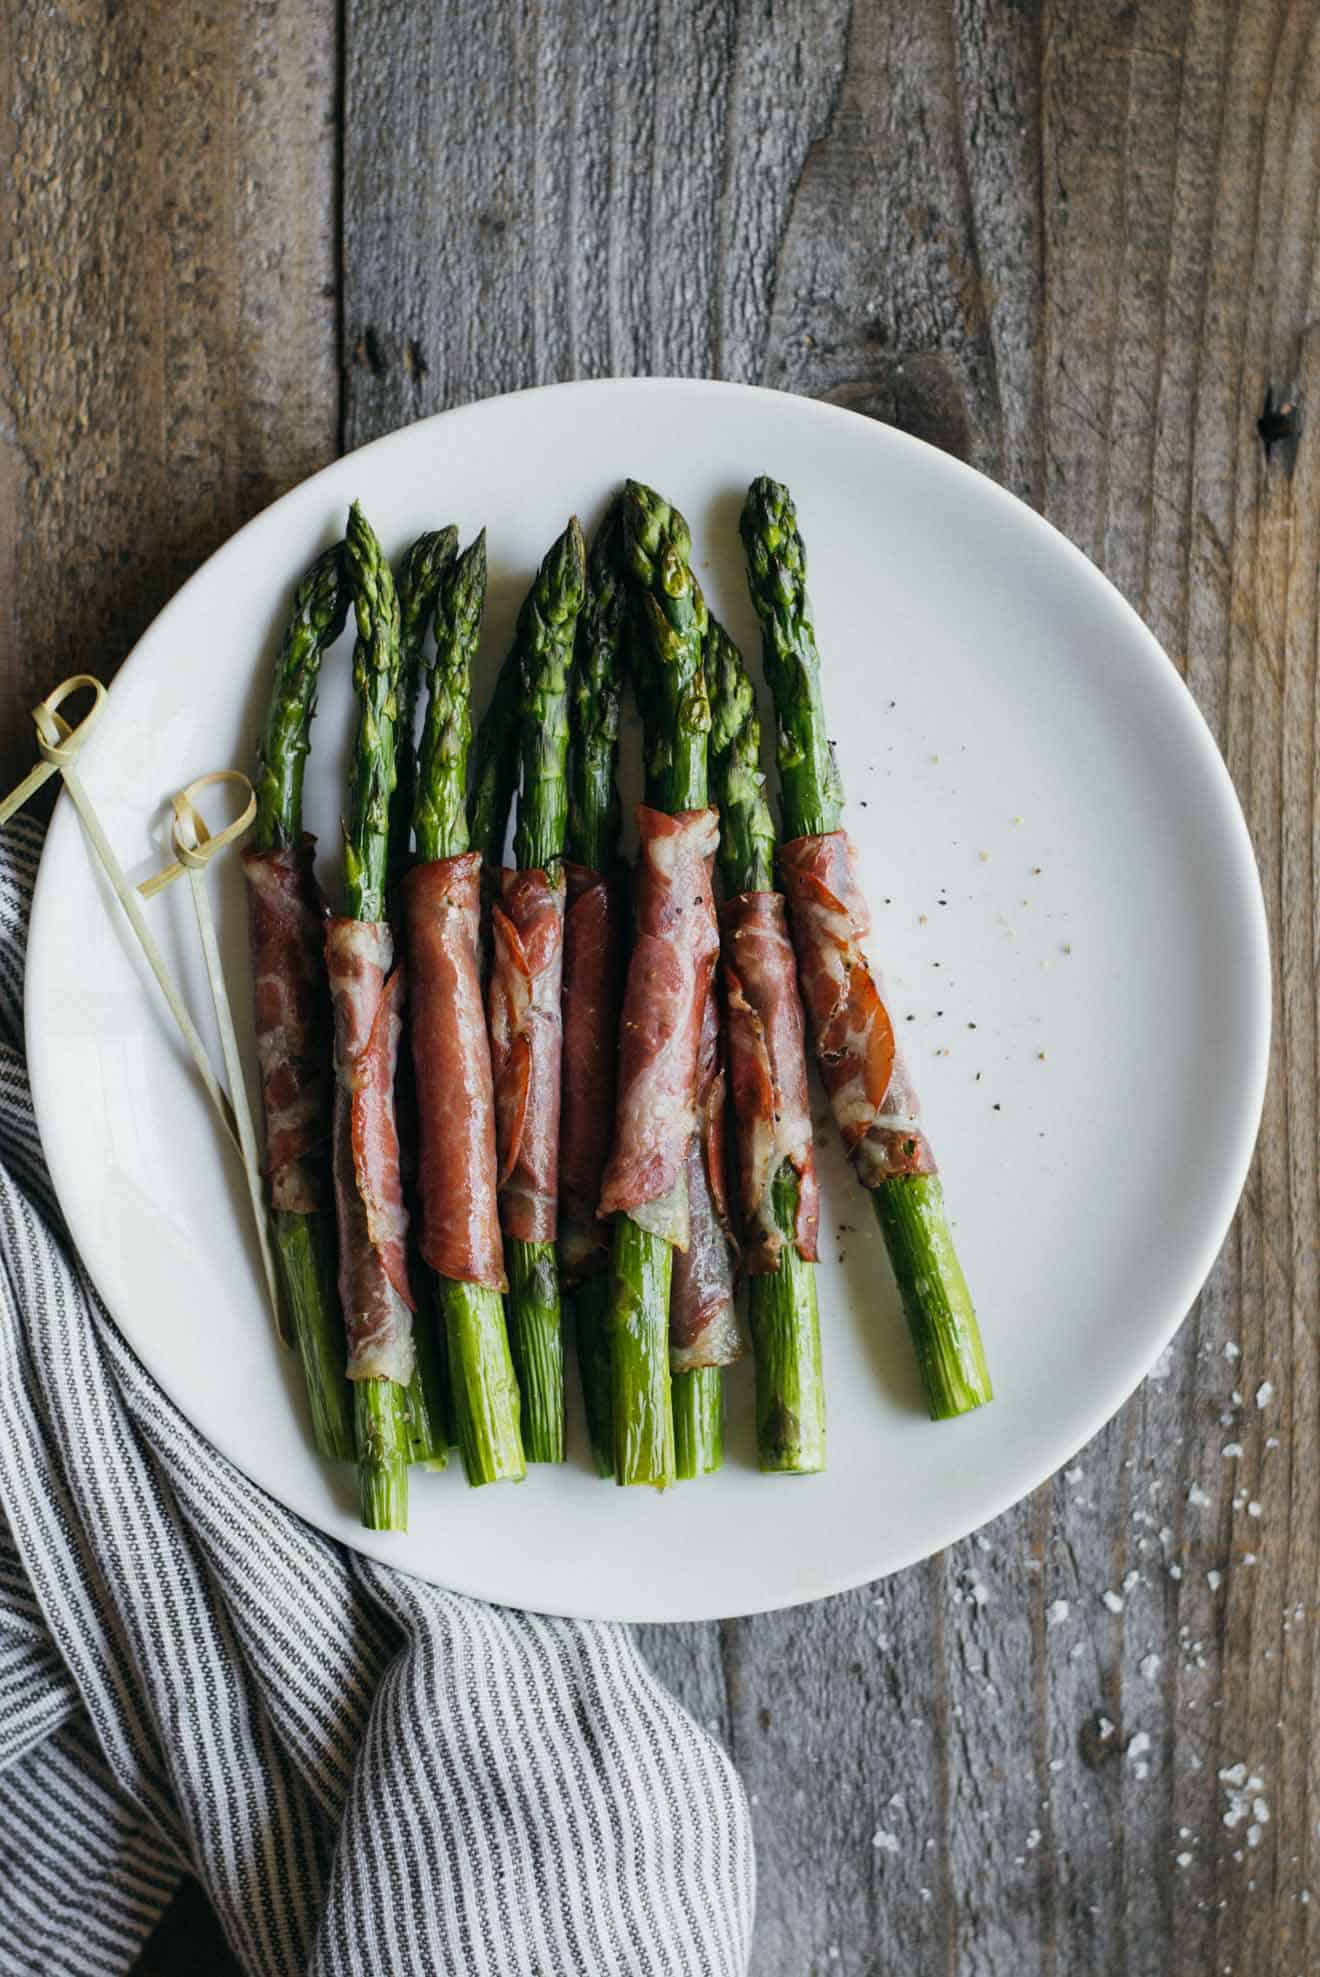 Dry Coppa Wrapped Asparagus - easy appetizer ready in 15 minutes and made with just 5 ingredients!